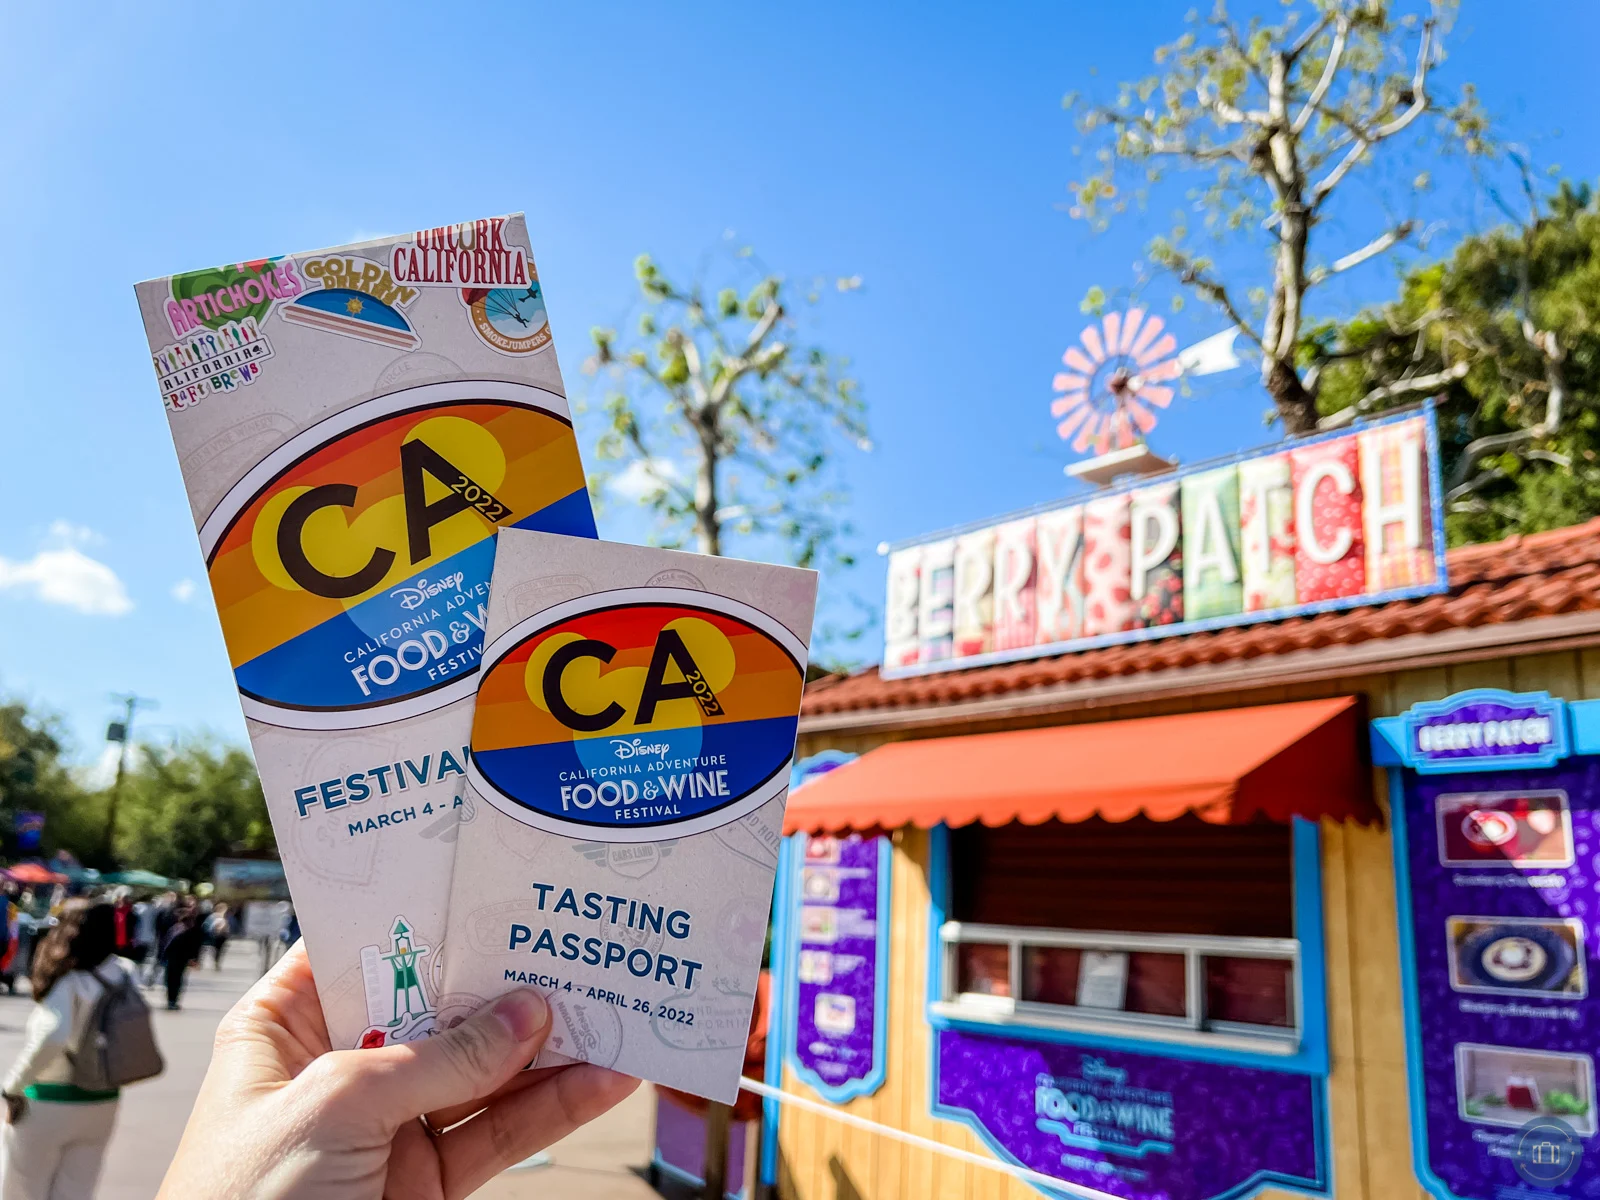 2022 disneyland food and wine festival brochures held in front of festival marketplace booth